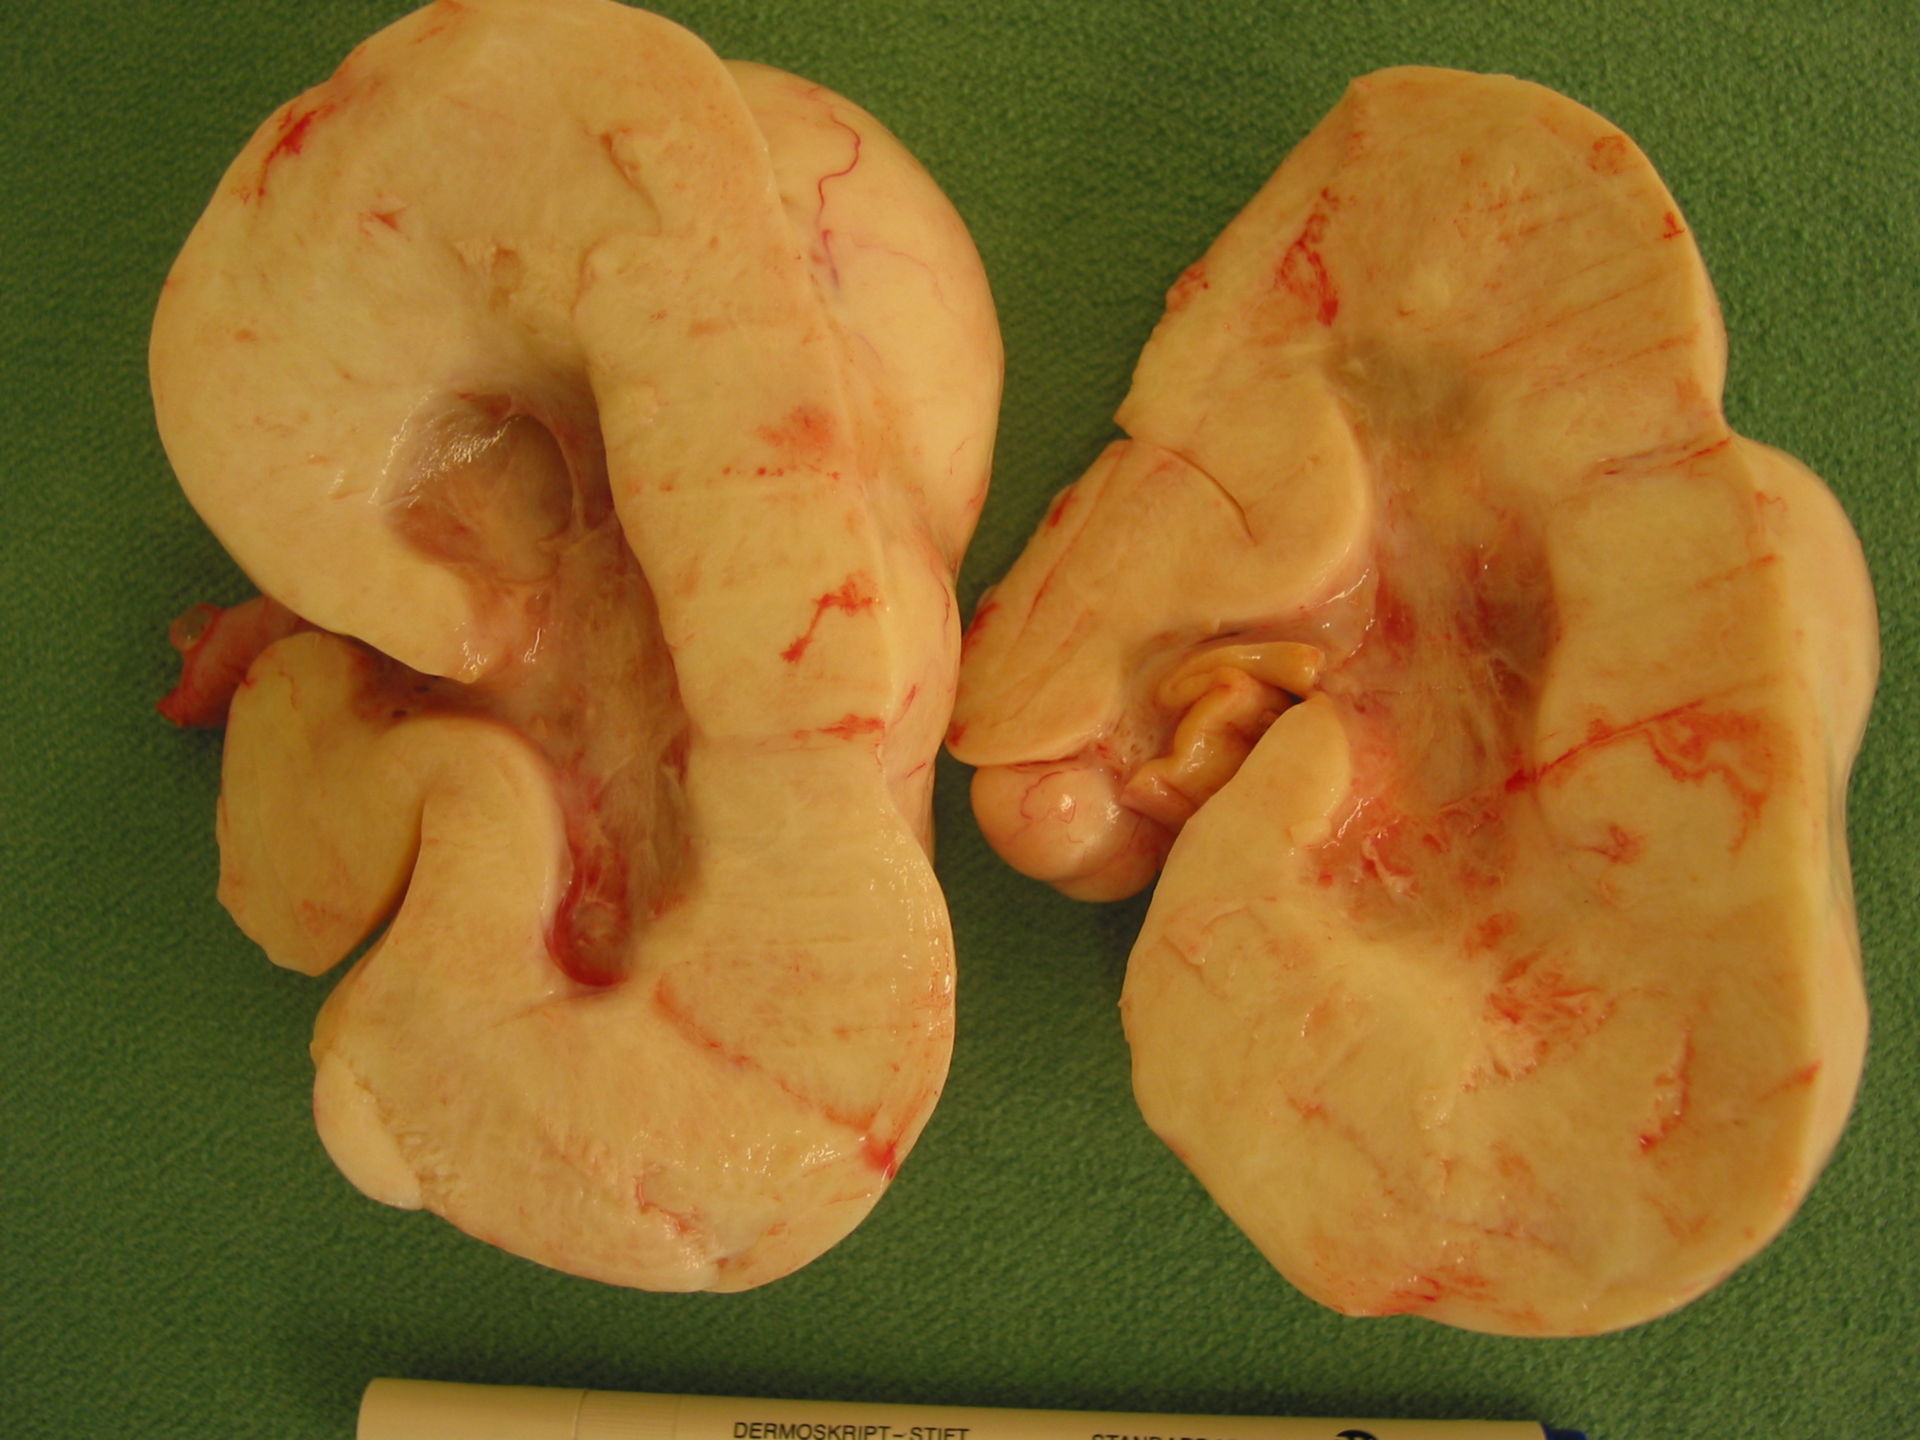 Granulosa cell tumor of the left ovary